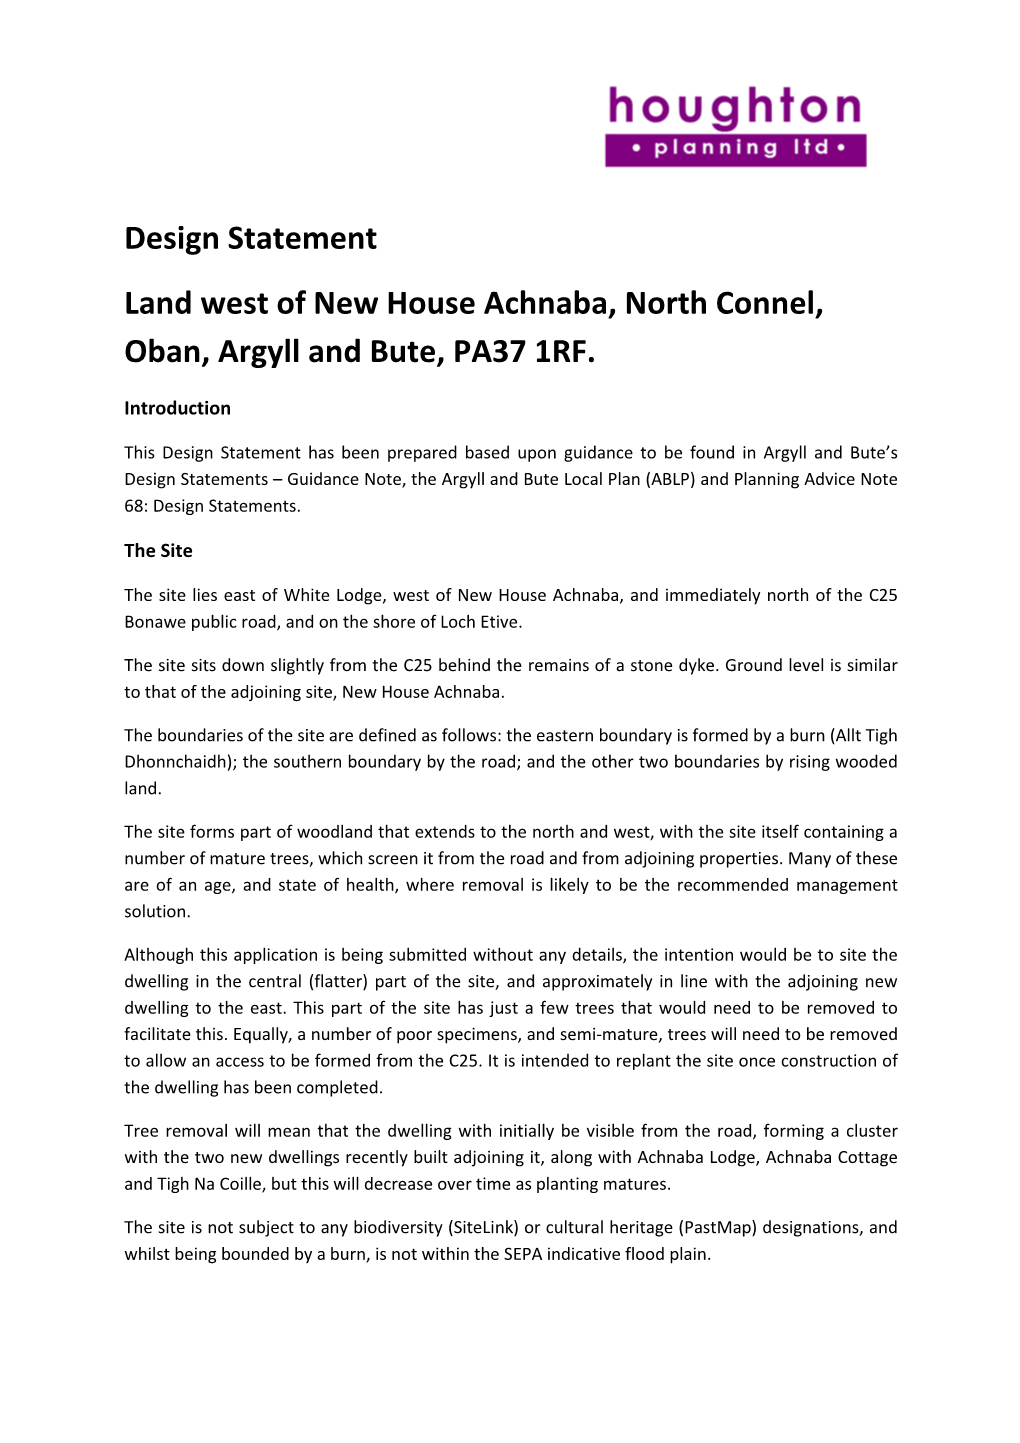 Design Statement Land West of New House Achnaba, North Connel, Oban, Argyll and Bute, PA37 1RF